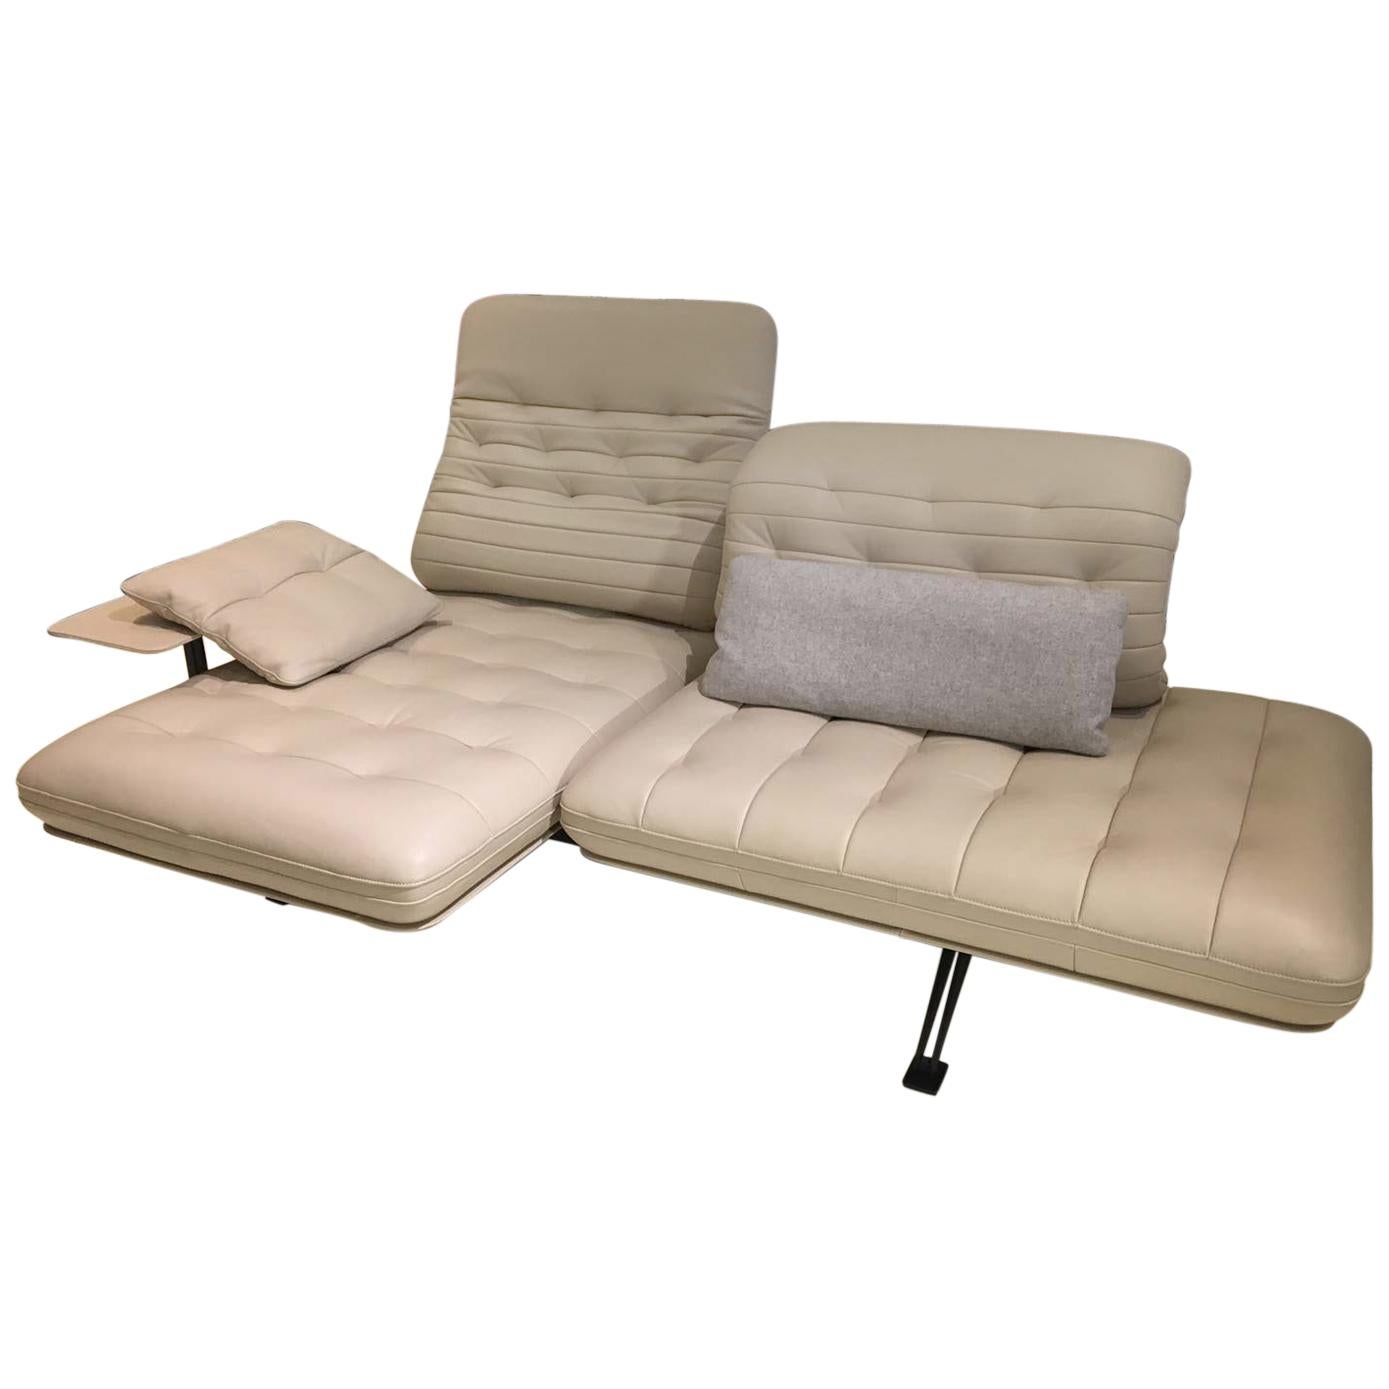 DS-490 Functional Sofa Cream White Leather with Side Table & Cushions by De Sede